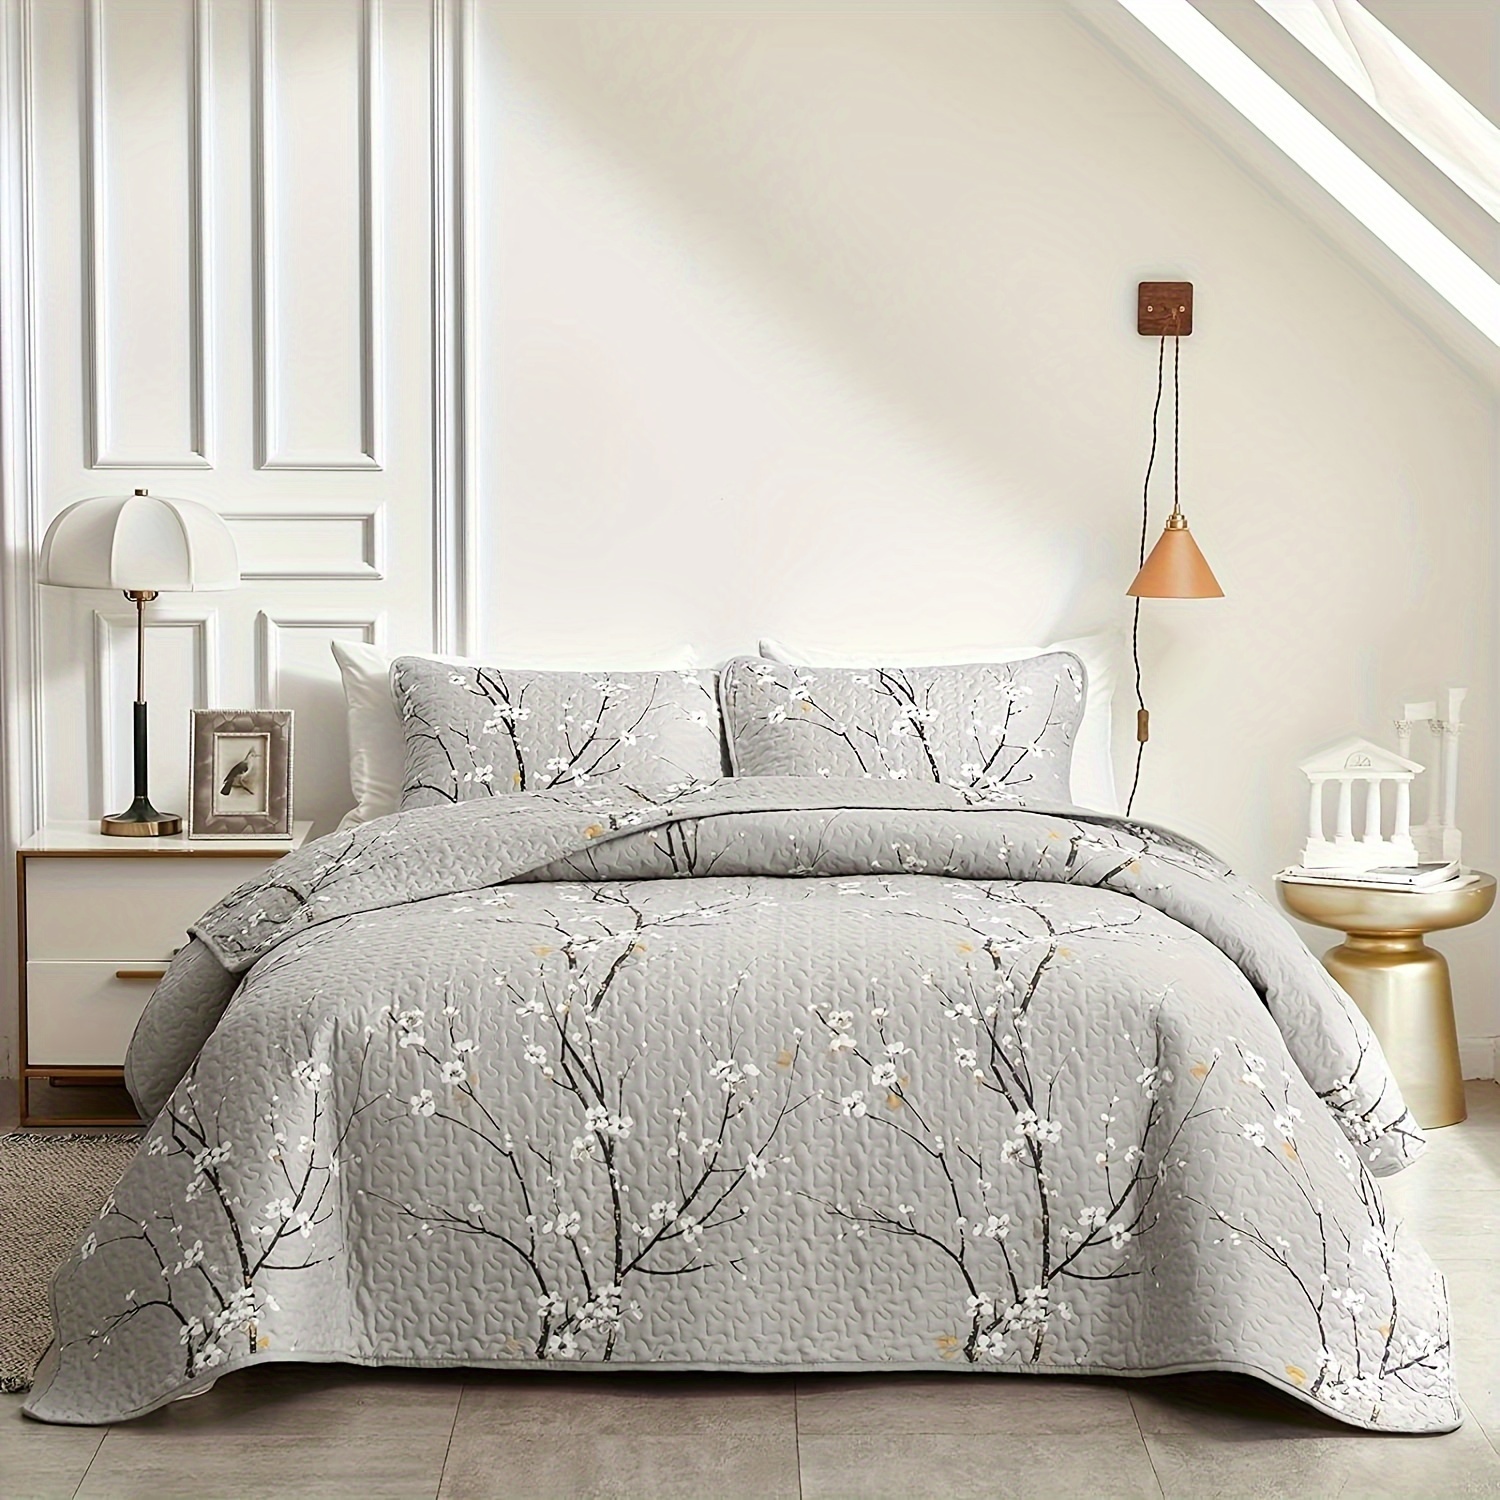 

Plum Grey Quilt Set - King Size Reversible Quilt Bedding Set, 3 Pieces Lightweight Bedspread, Soft Botanical Bed Coverlet Set With 2 Pillow Shams For All Seasons (106"x96")